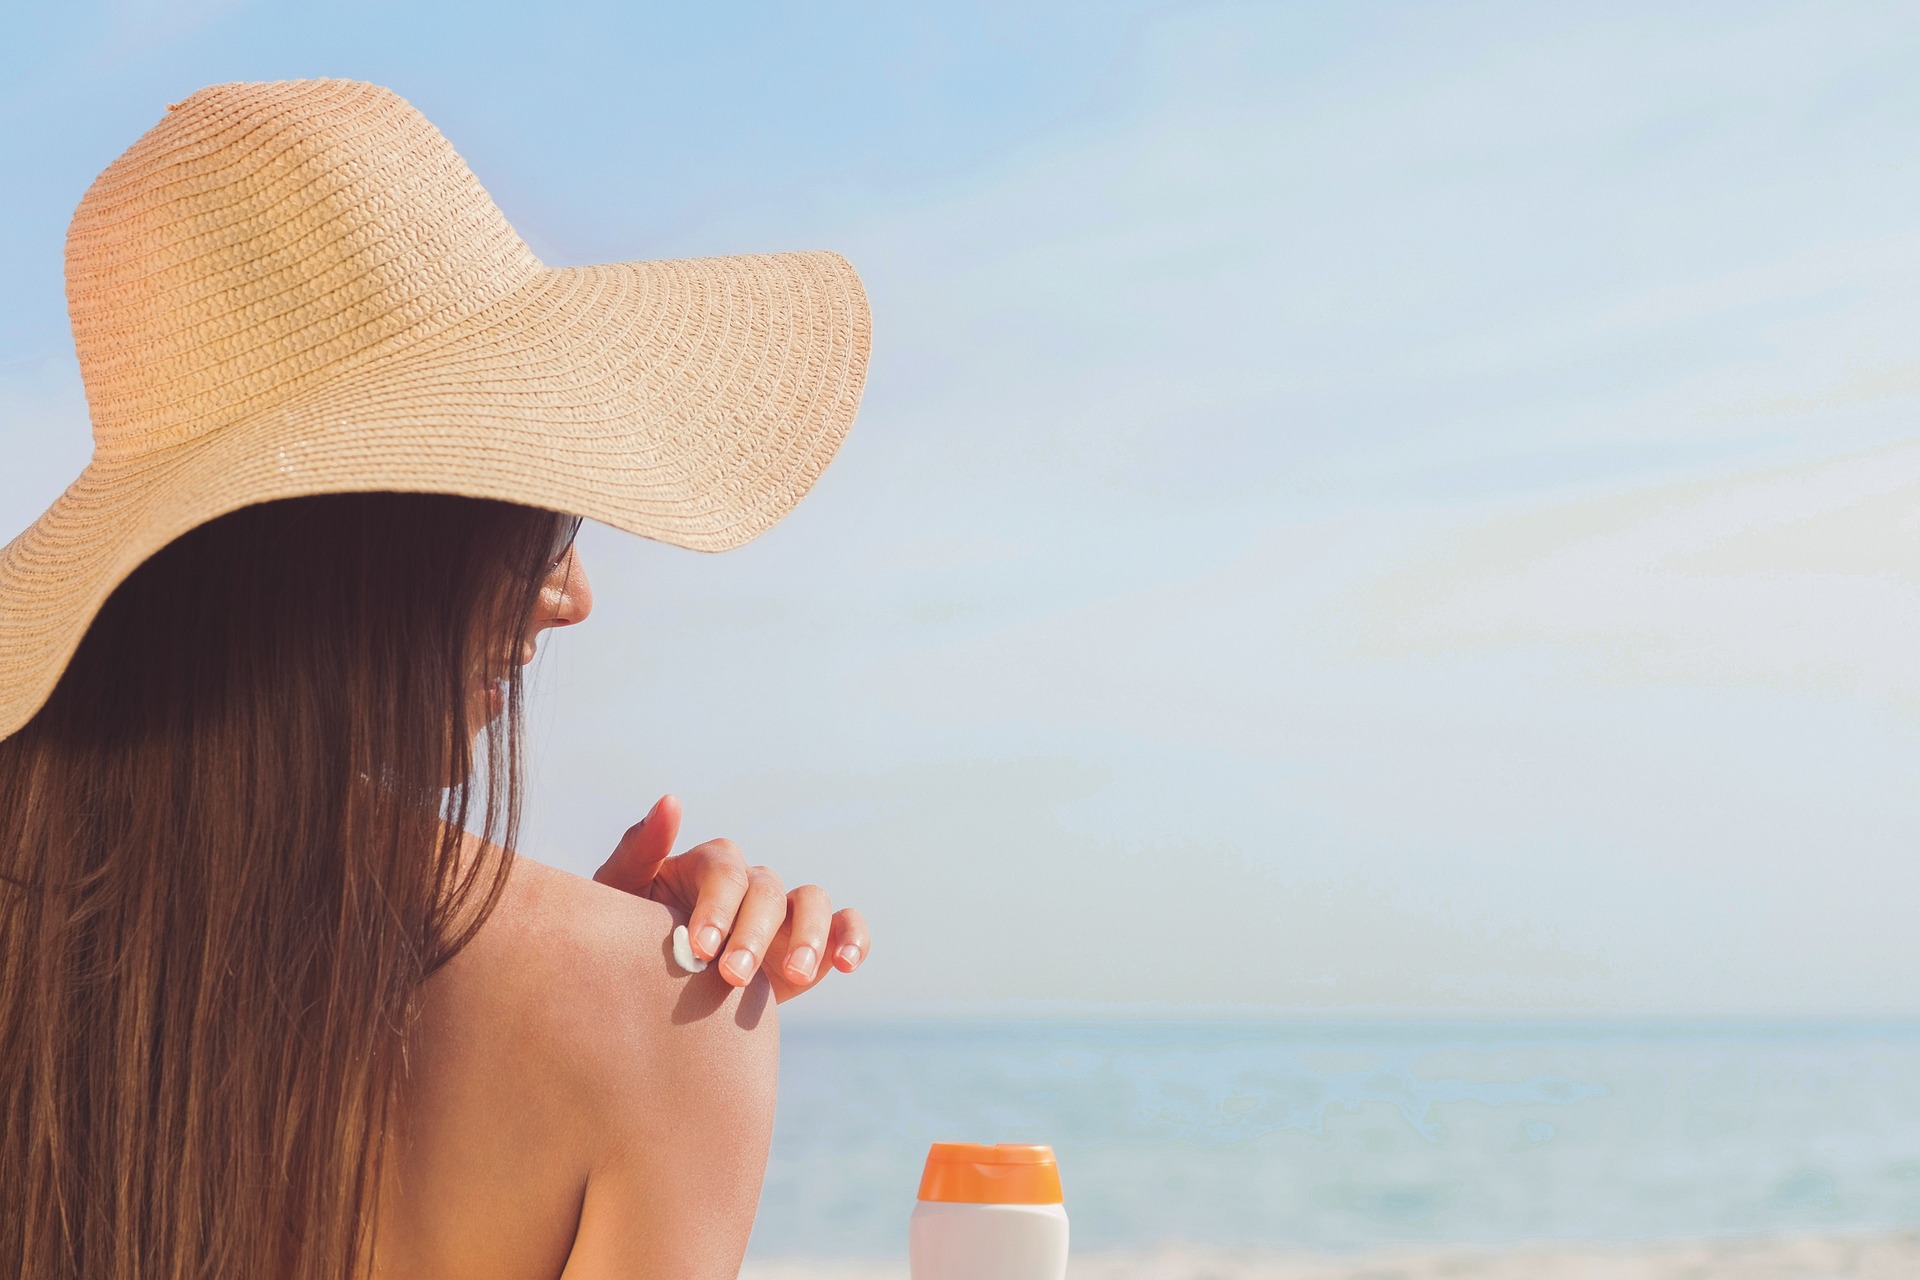 Using sunscreens may help maintain blood vessel function